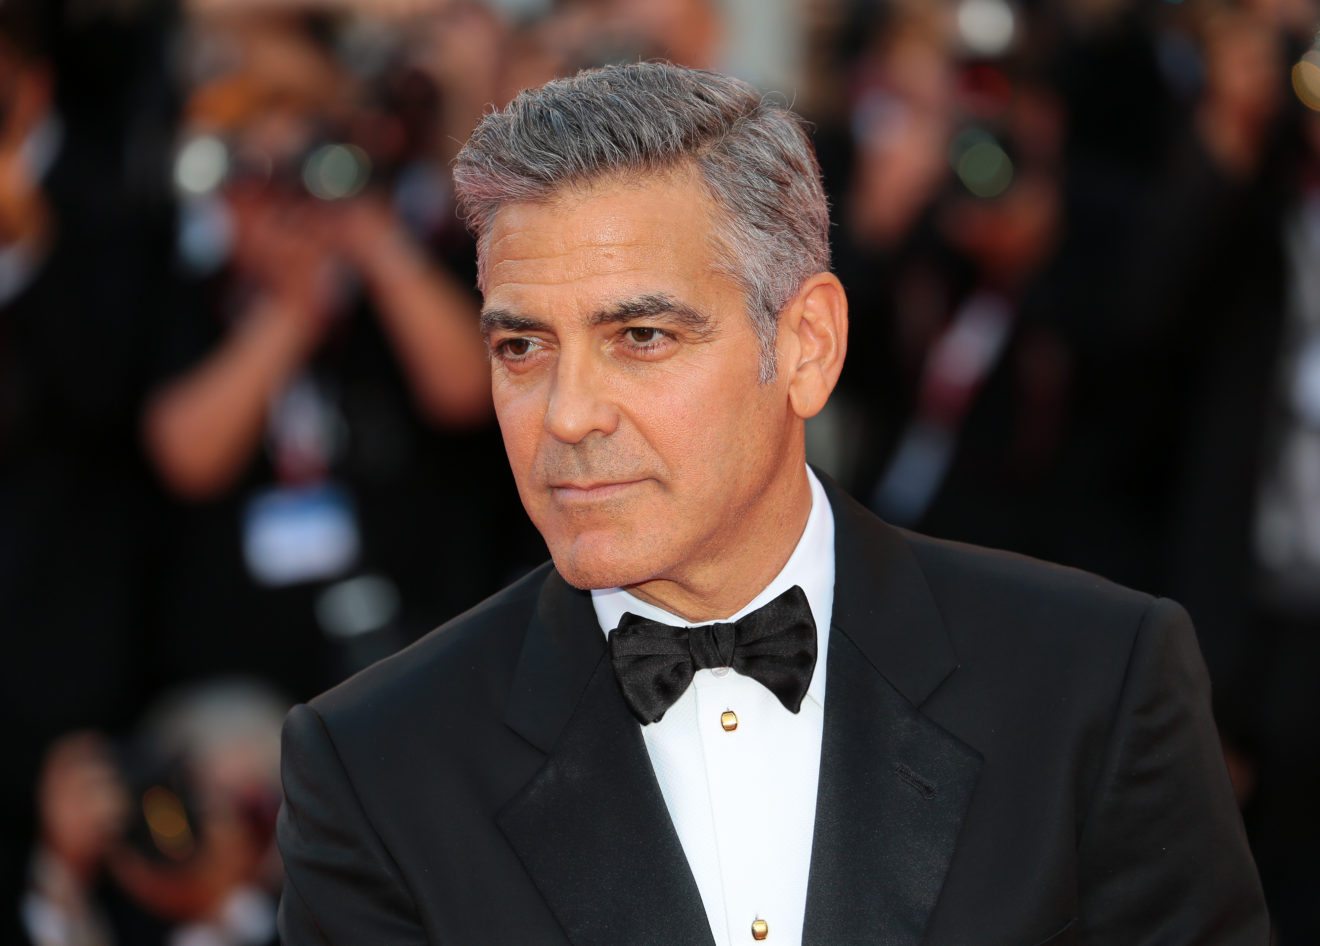 George Clooney for president?